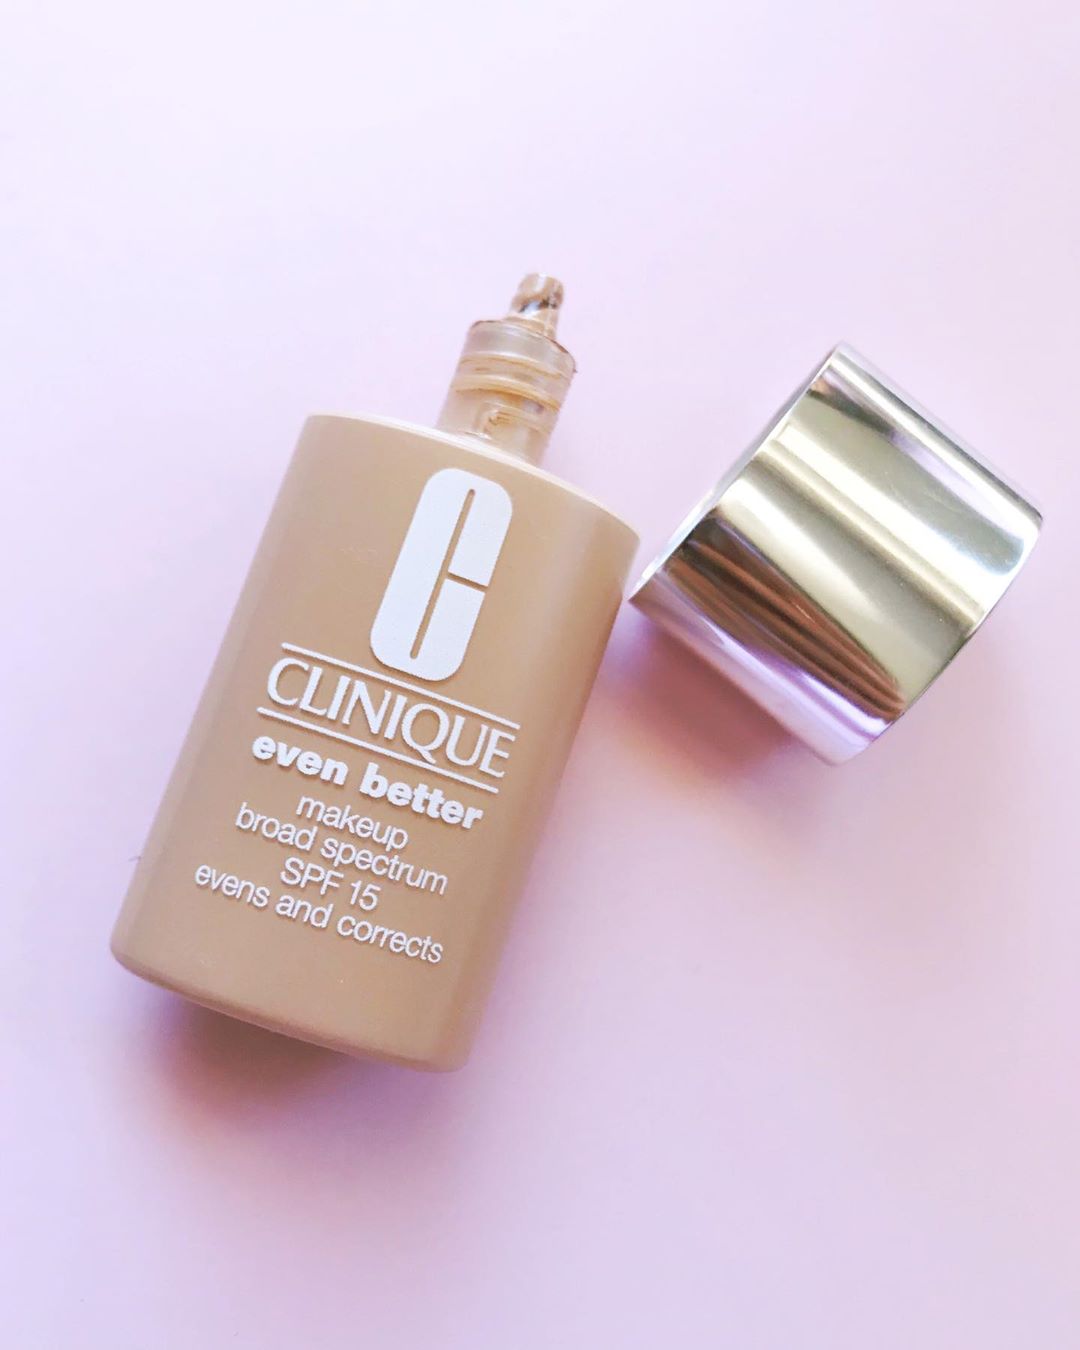 Clinique - "On days when I need foundation that's weightless, it gives me 24 hours of hydration, but doesn't leave me oily and is fragrance free. I've been enjoying Clinique Even Better Makeup," says...